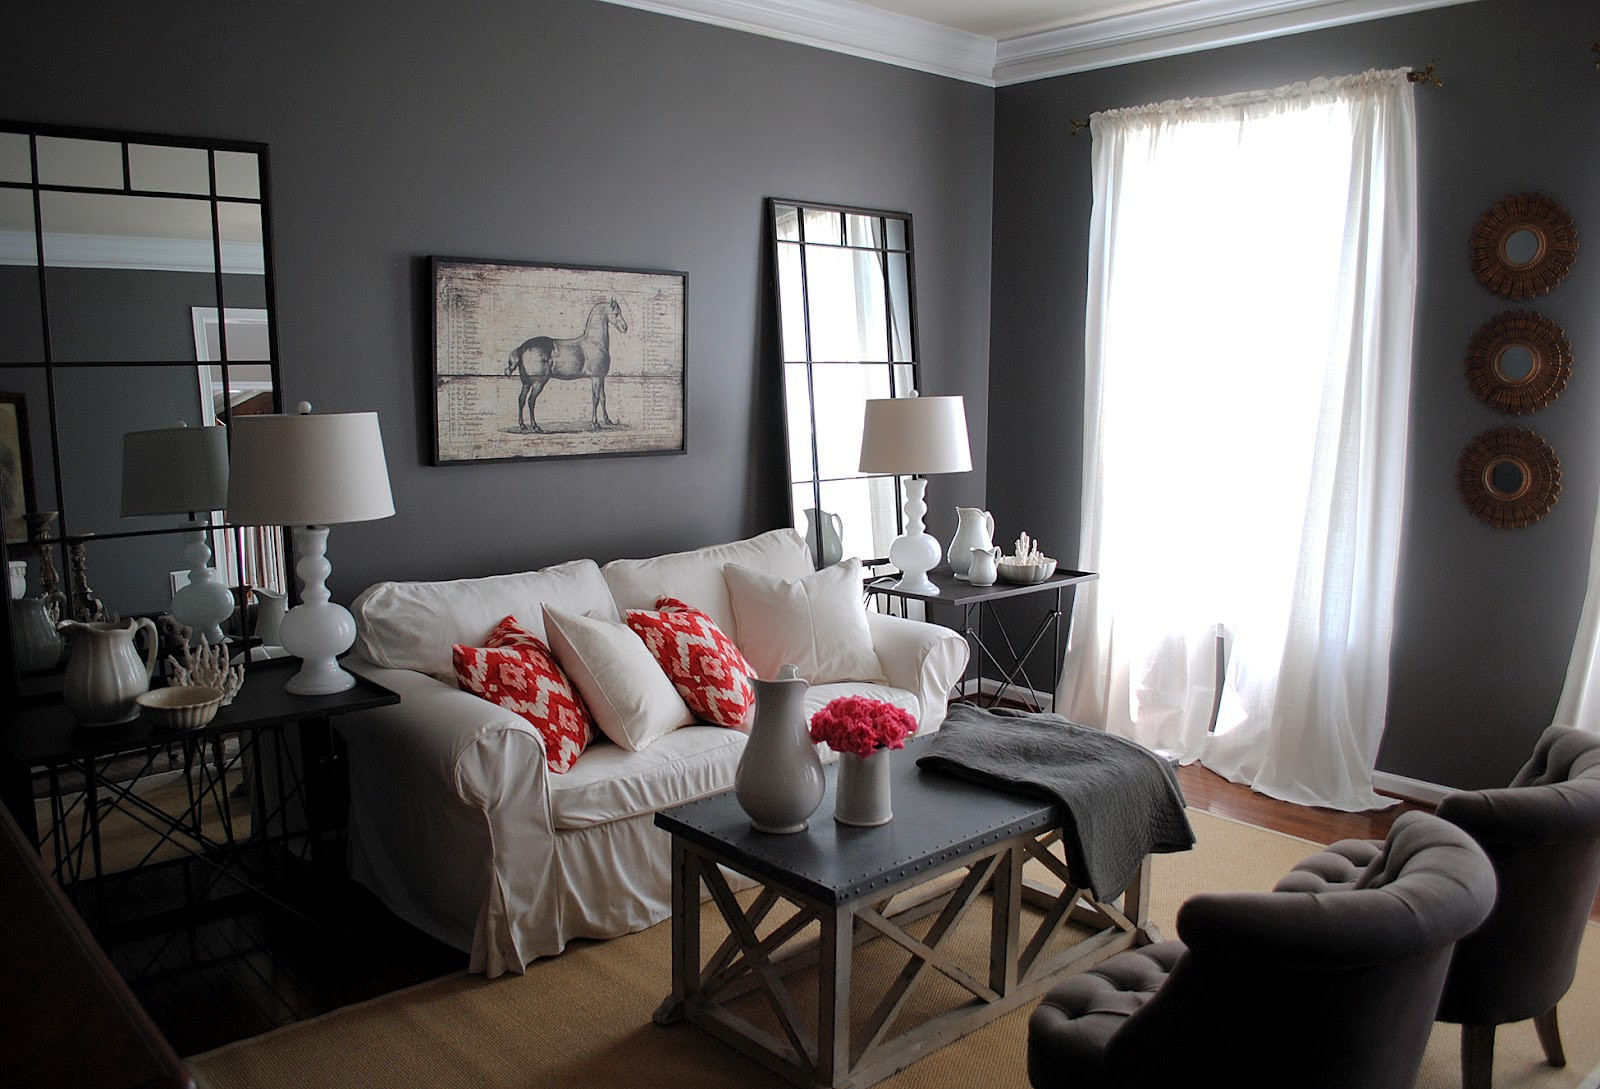 Gray Paint Living Room Ideas
 My Living Room The Big Reveal & Huge Giveaway The